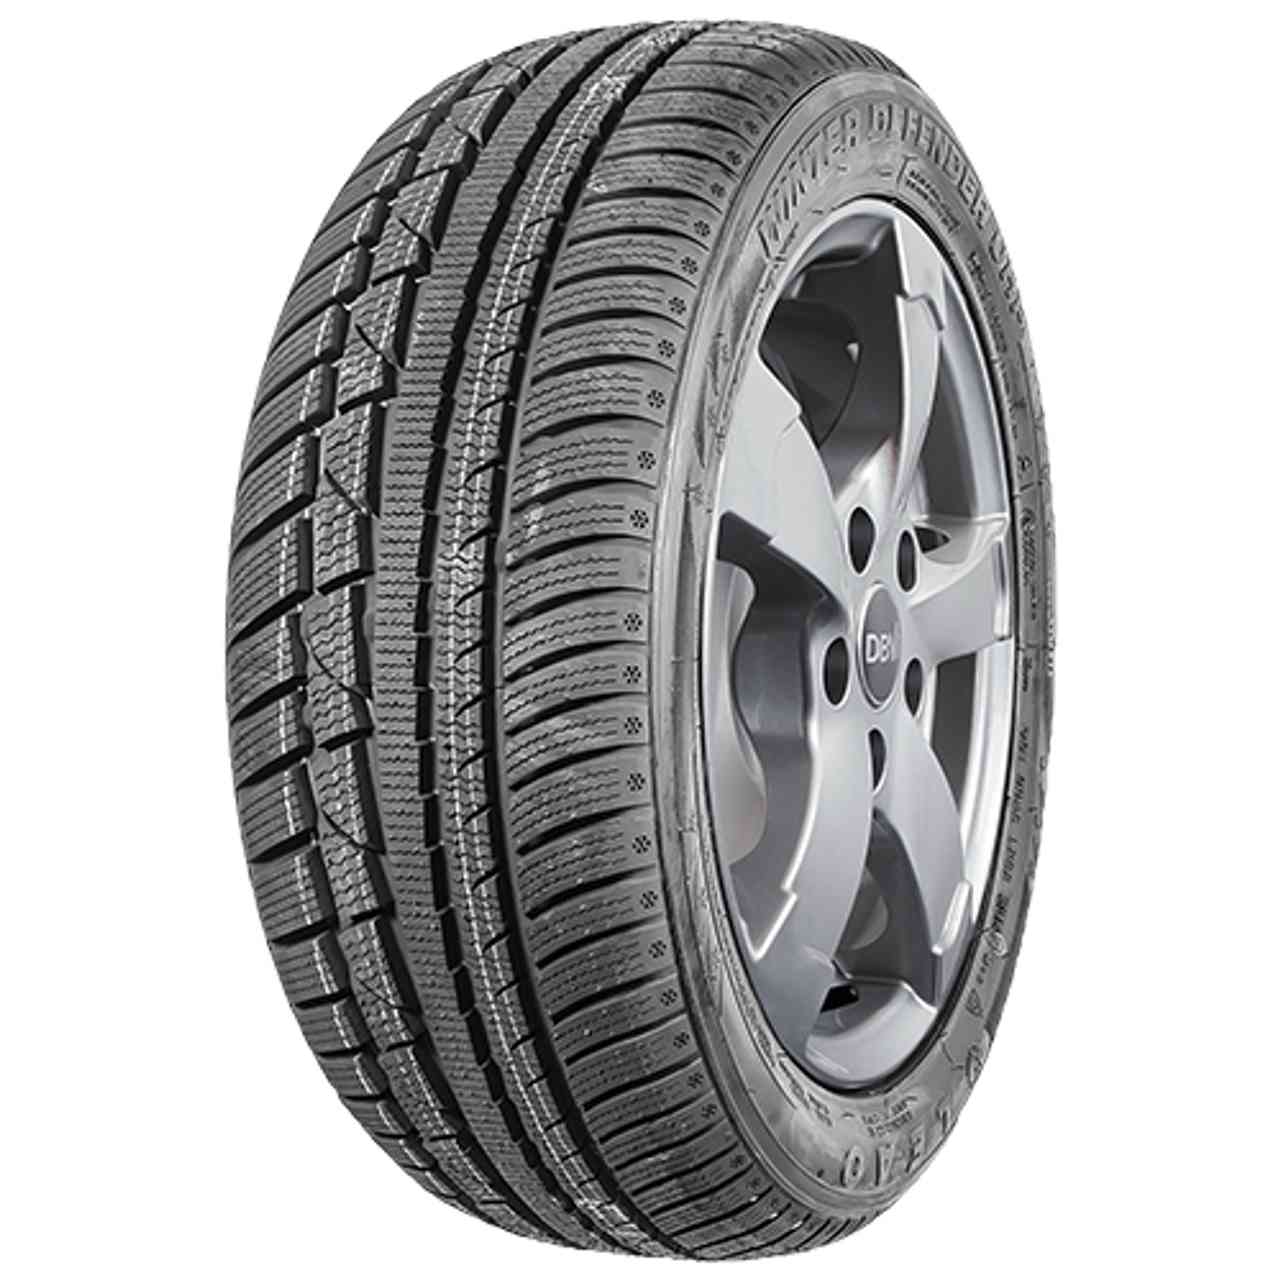 LEAO WINTER DEFENDER UHP 225/50R17 98V BSW von LEAO